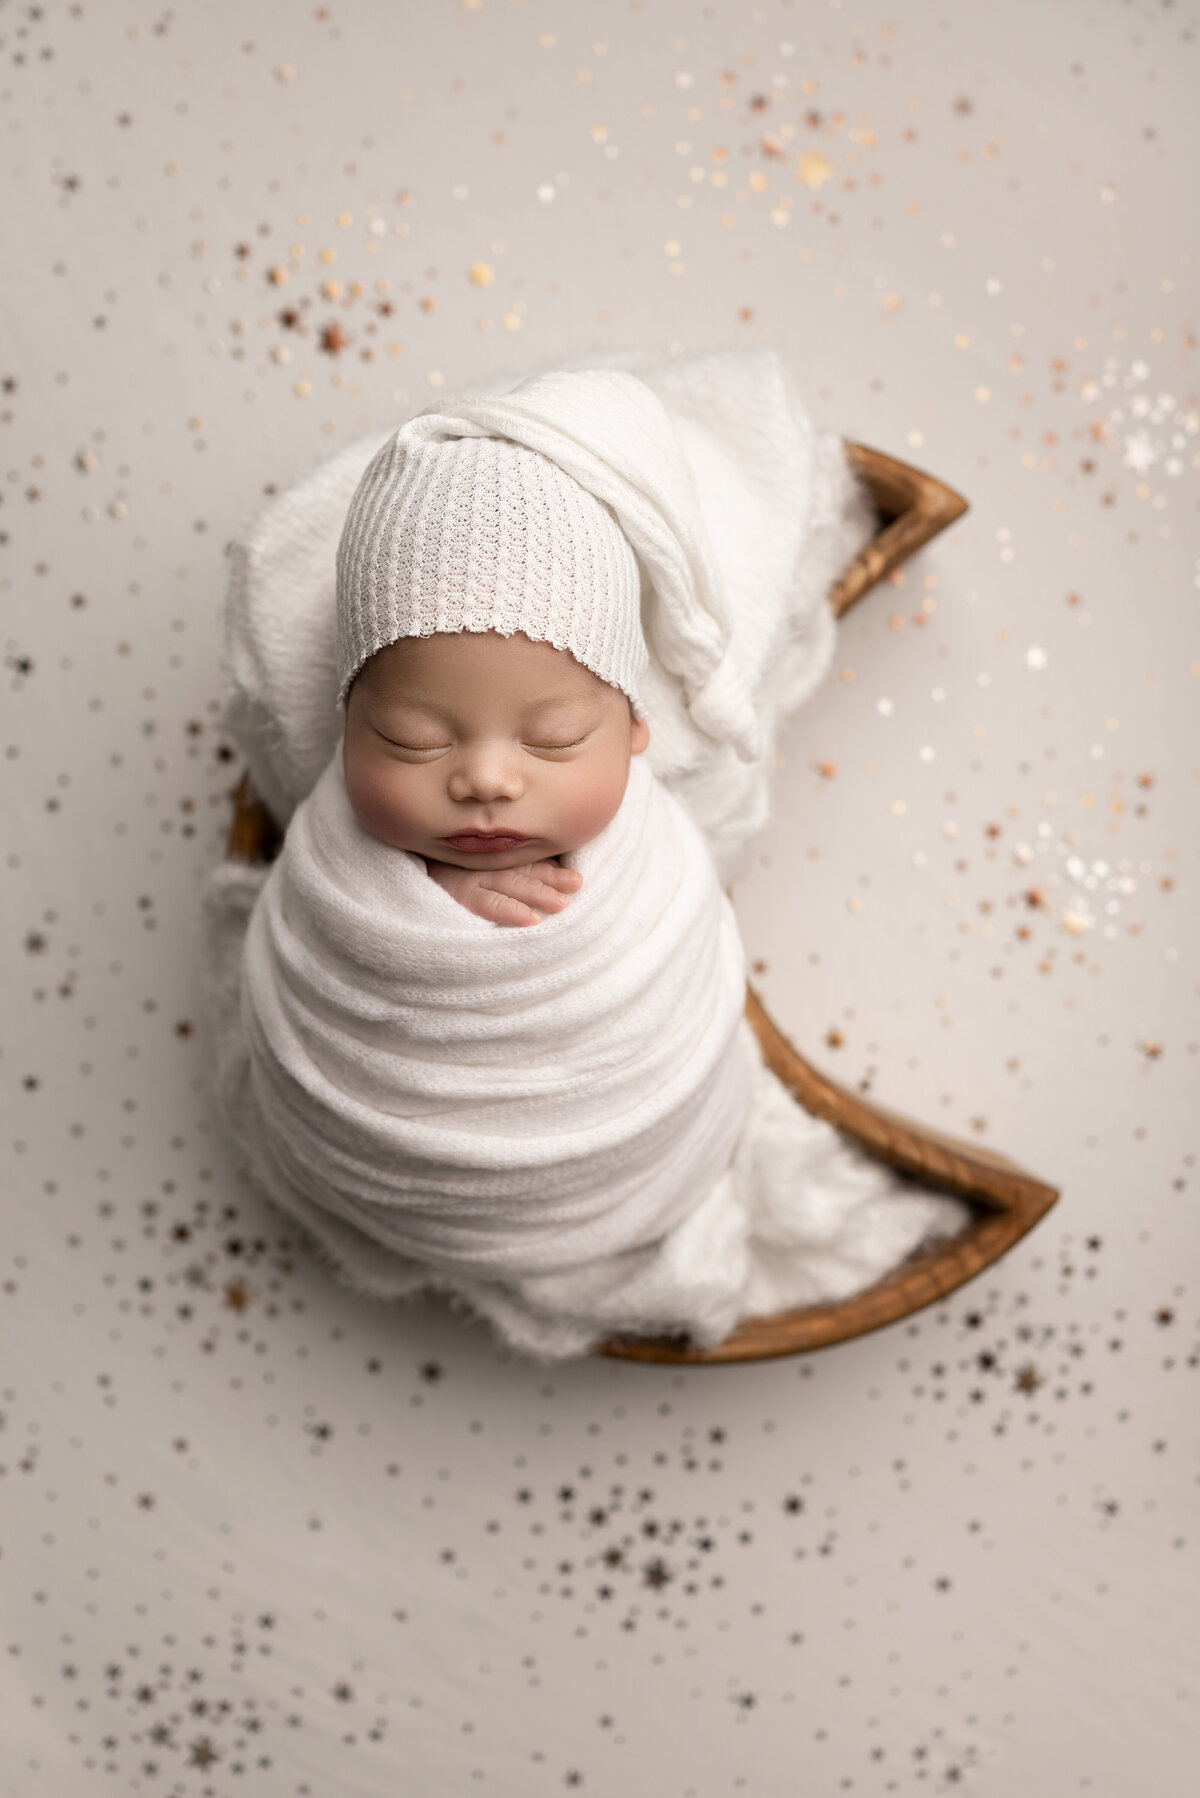 New Jersey's best newborn photographer, Katie Marshall, captures an aerial image of a sleeping newborn baby. Baby is swaddled in white with his fingers peeking out. He is wearing a long cap and laying in a moon-shaped bowl.